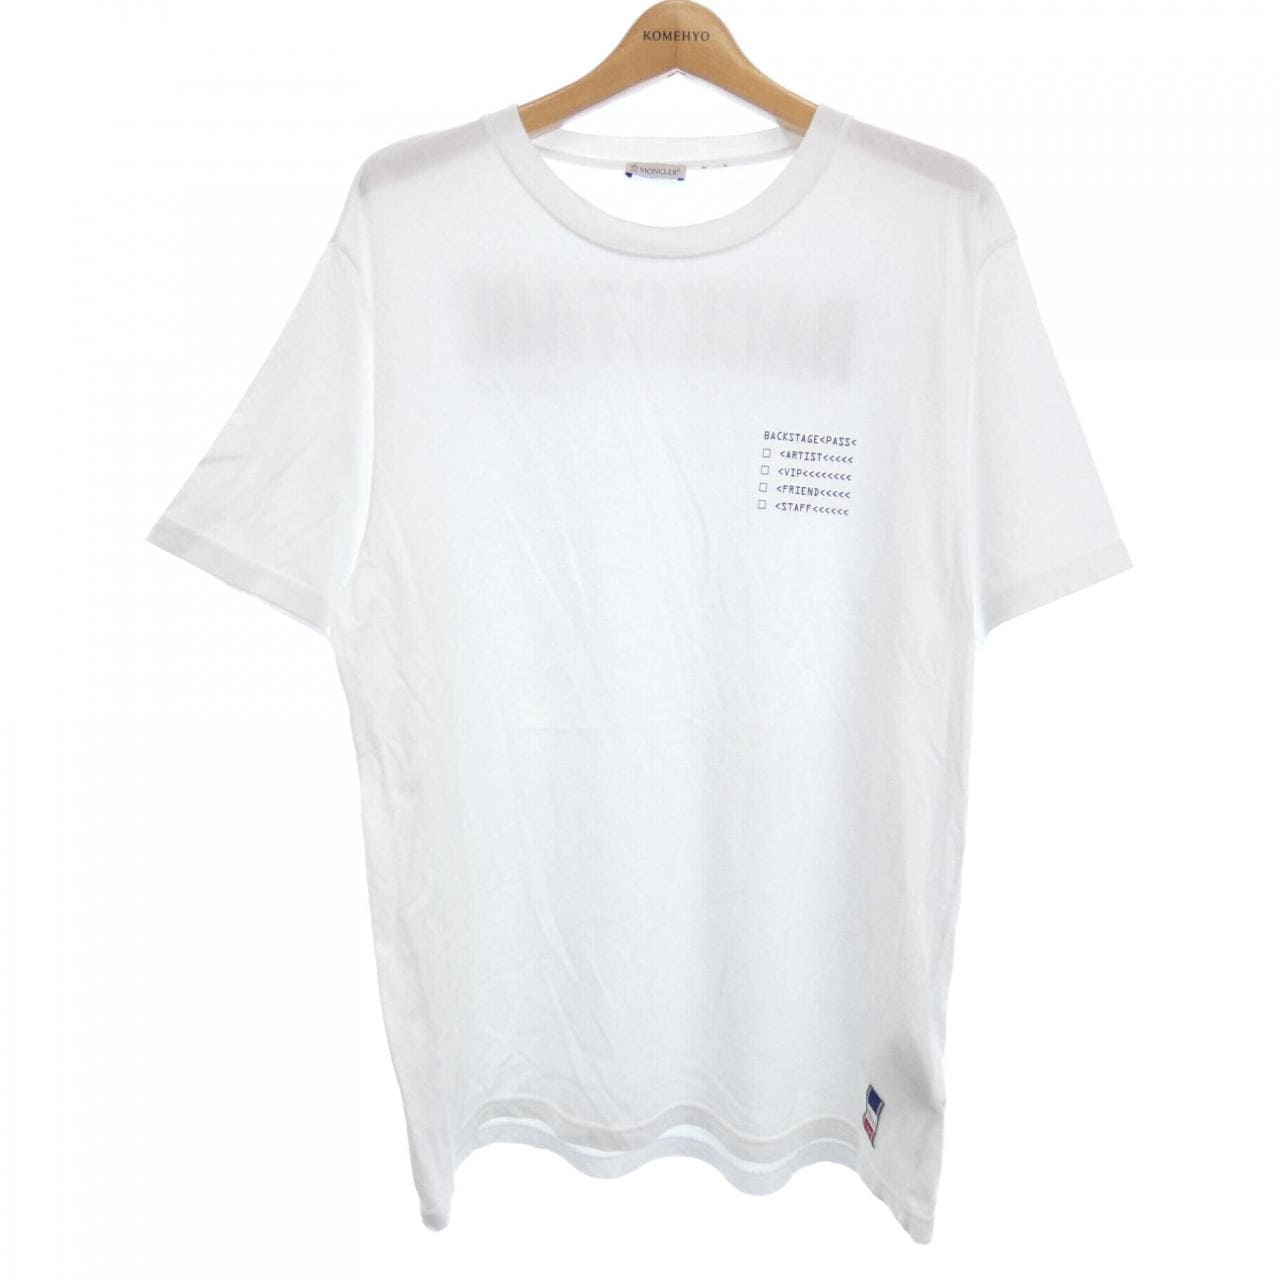 MONCLER X FRAGMENT BACKSTAGE Tシャツ　モンクレール